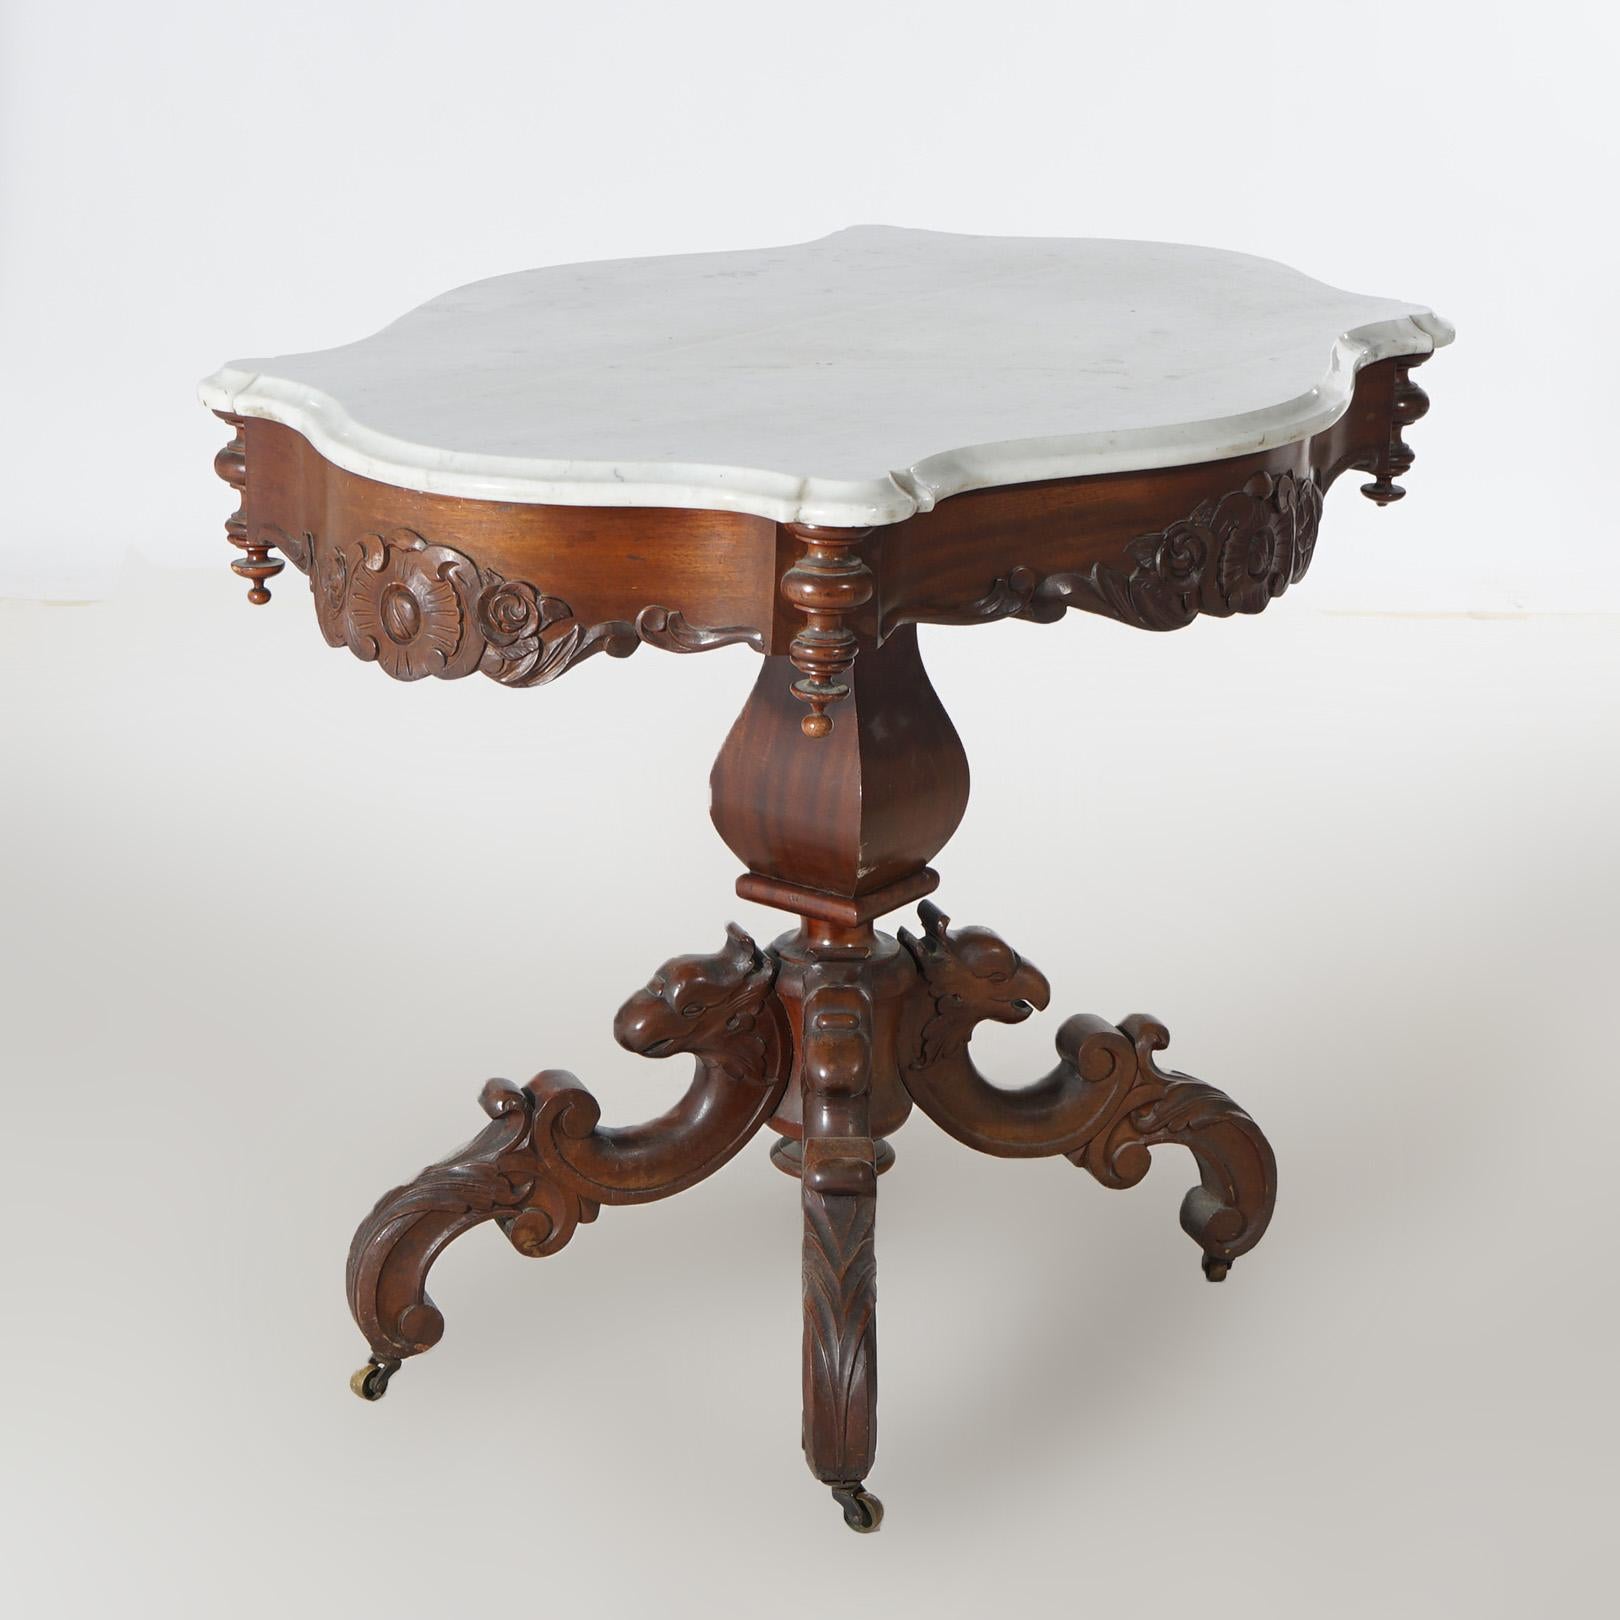 An antique Victorian parlor table offers beveled and shaped marble top over carved walnut base having floral decorated skirt and raised on griffin form scroll legs, c1880

Measures- 30.75''H x 38.25''W x 27''D